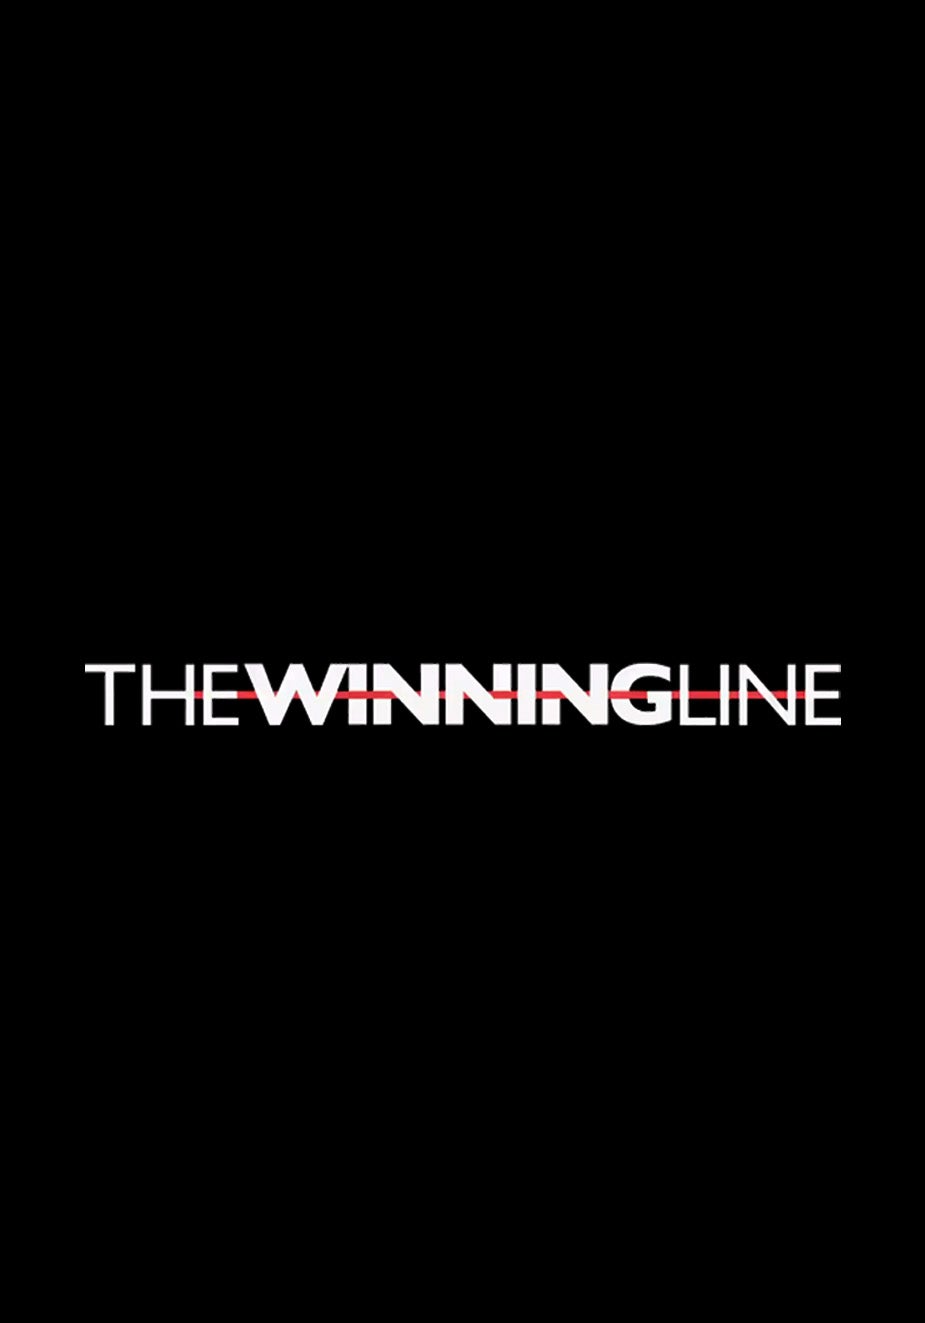 The Winning Line show - mobile